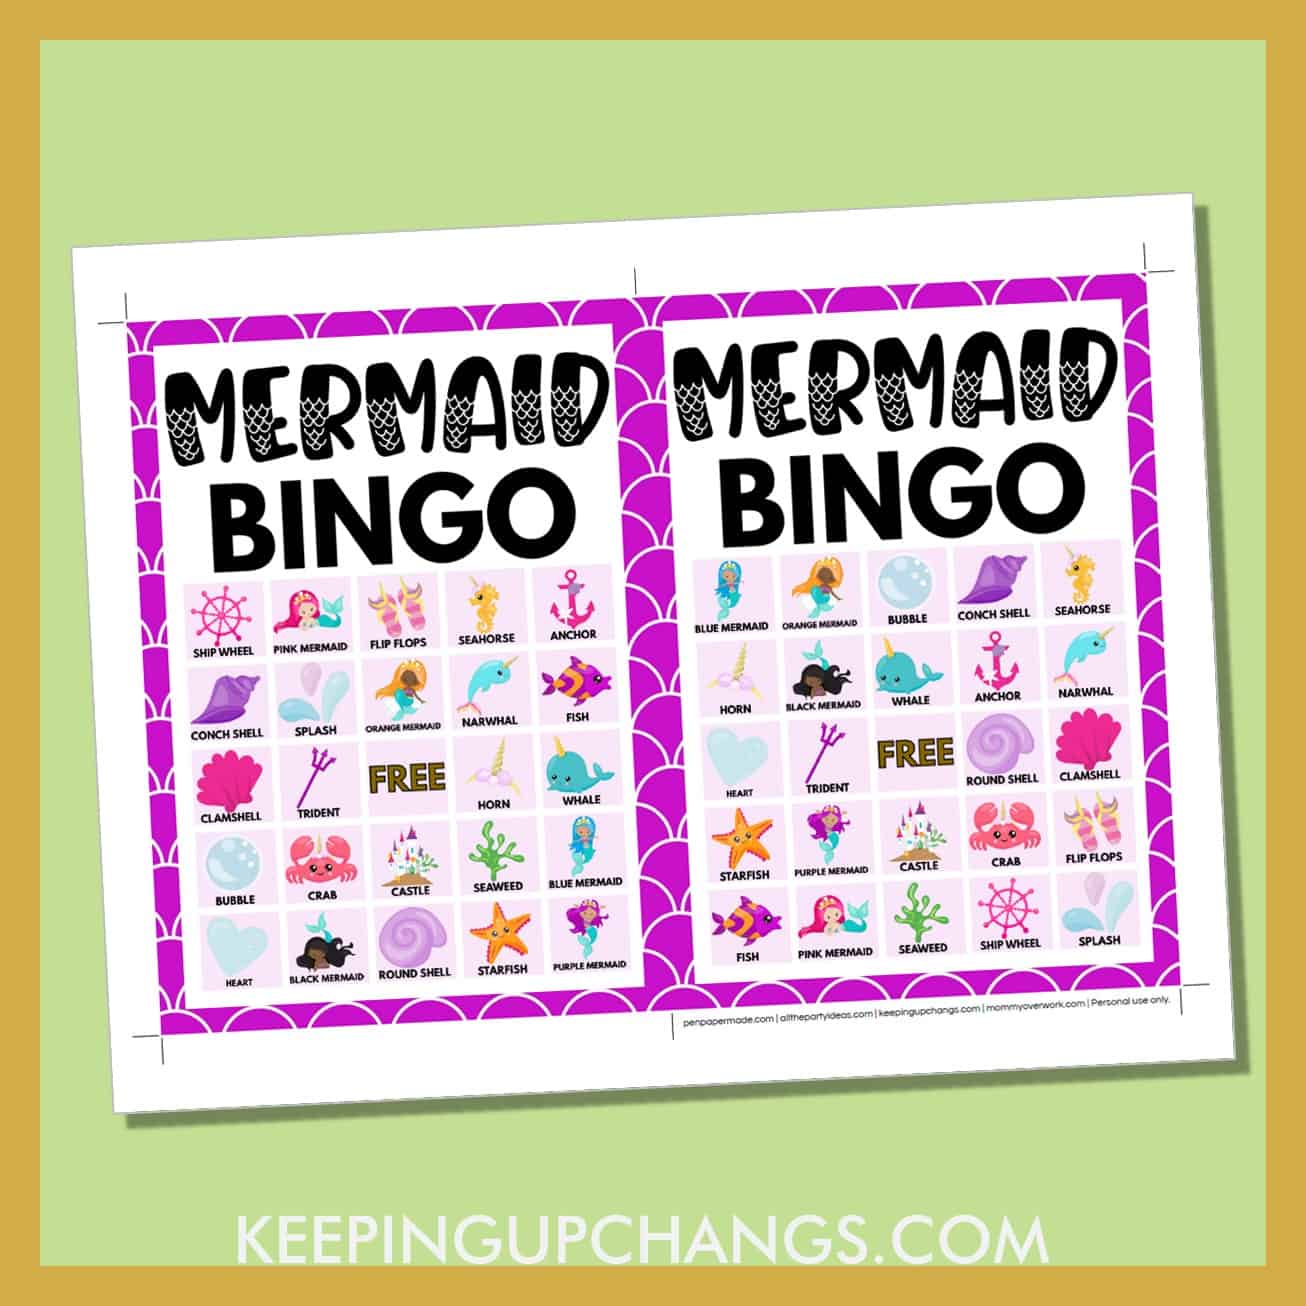 free mermaid bingo card 5x5 5x7 game boards with images and text words.